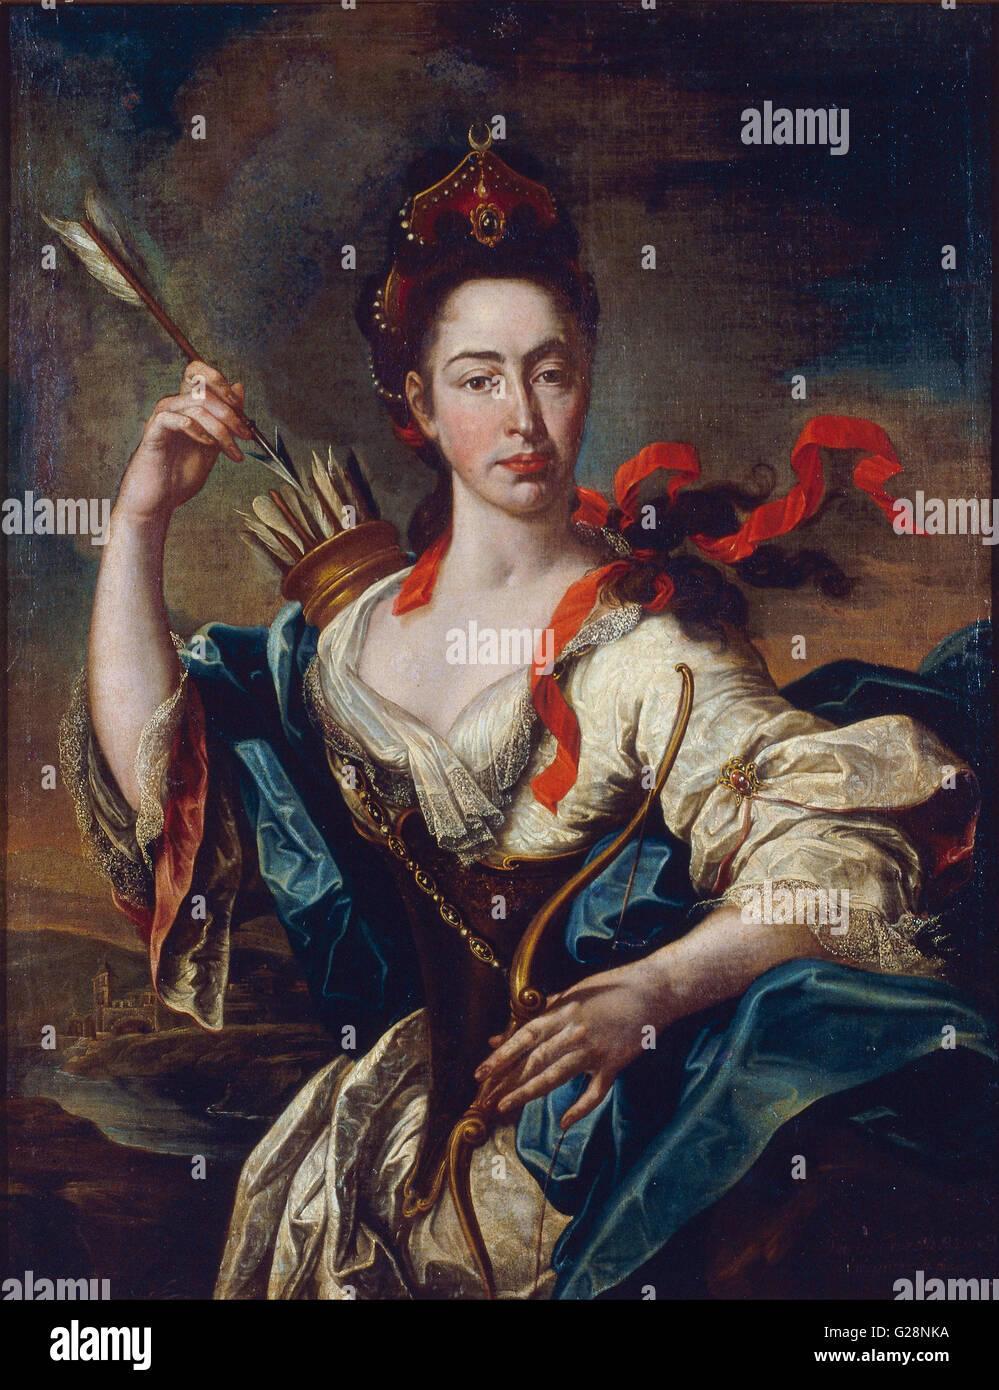 Pere Crusells - Portrait of a Woman with Attributes of Diana   - MNAC - Barcelona Stock Photo